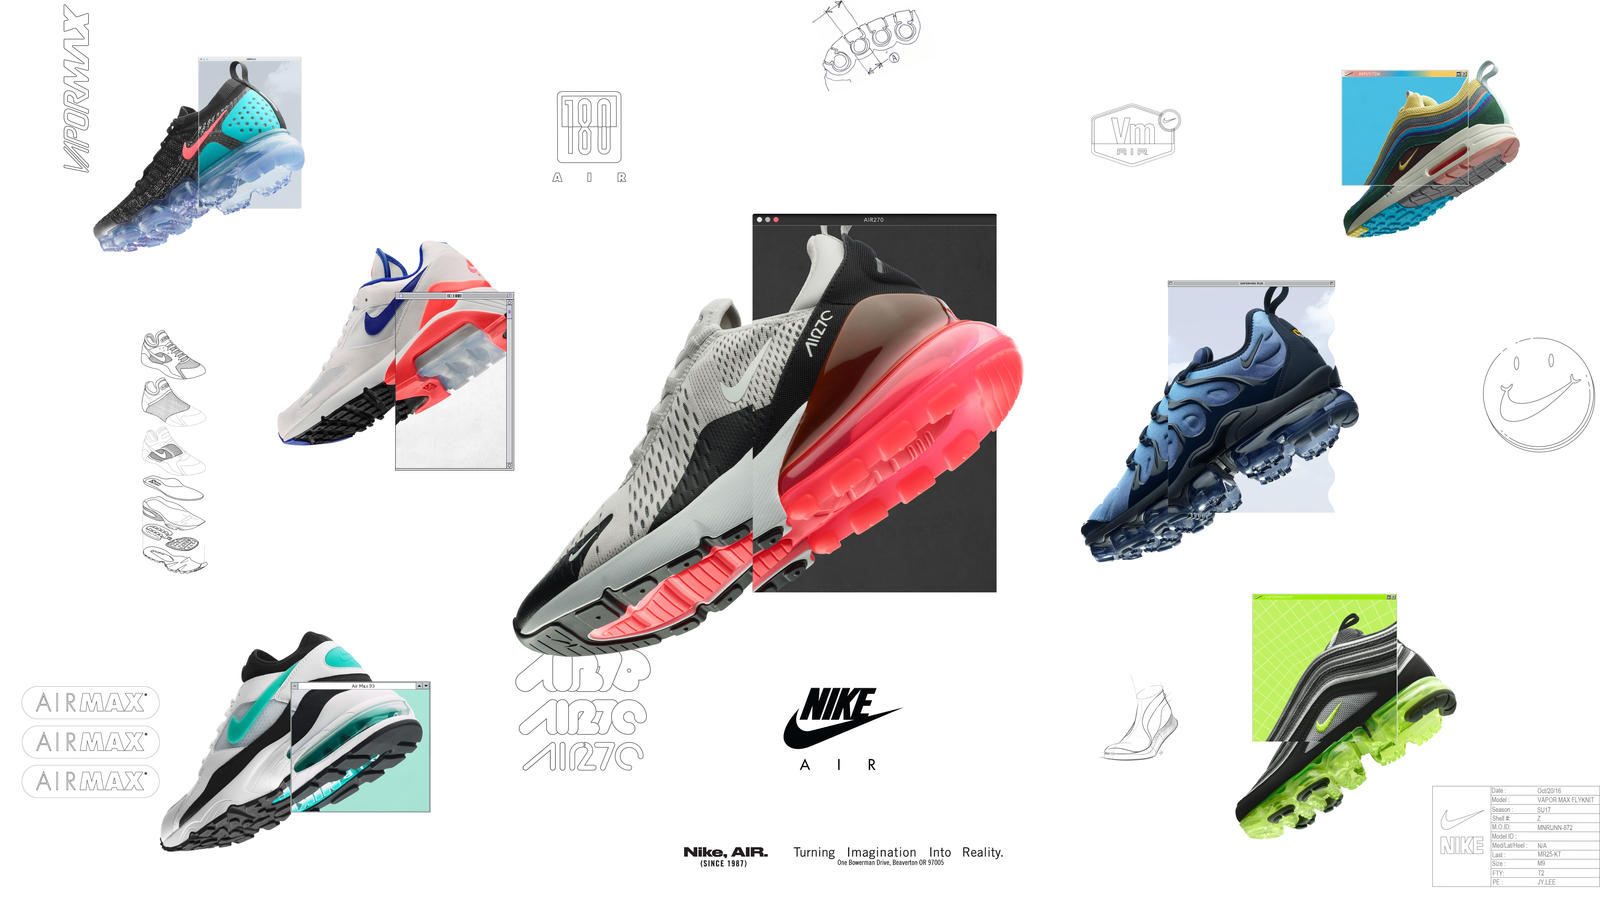 Air Max Day 2018 - The History Hatfield's sneaker and Nike's Air Max holiday